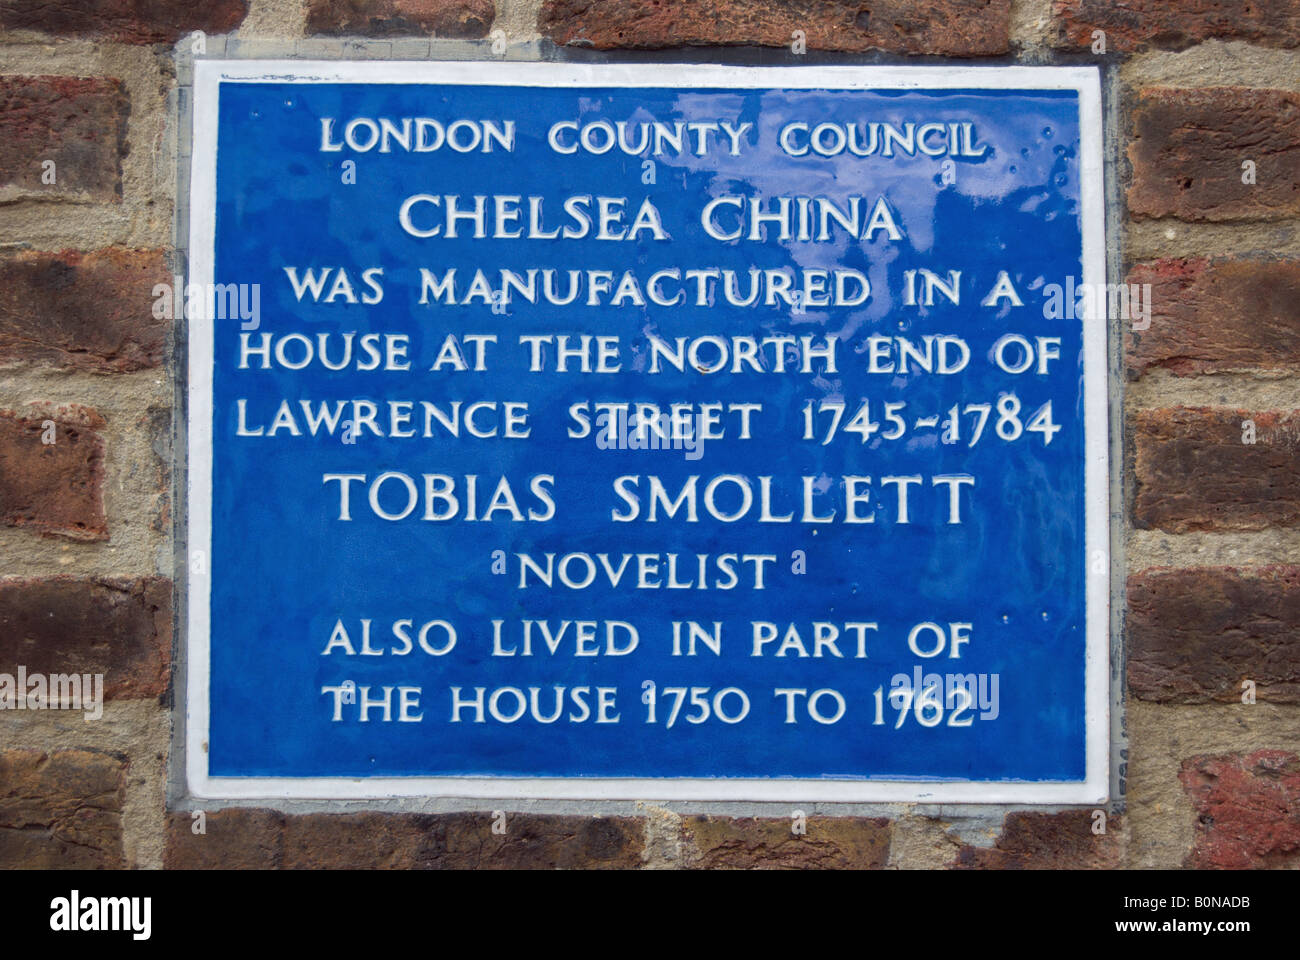 london blue plaque marking a former home of novelist tobias smollett and a place of the manufacture of chelsea china Stock Photo